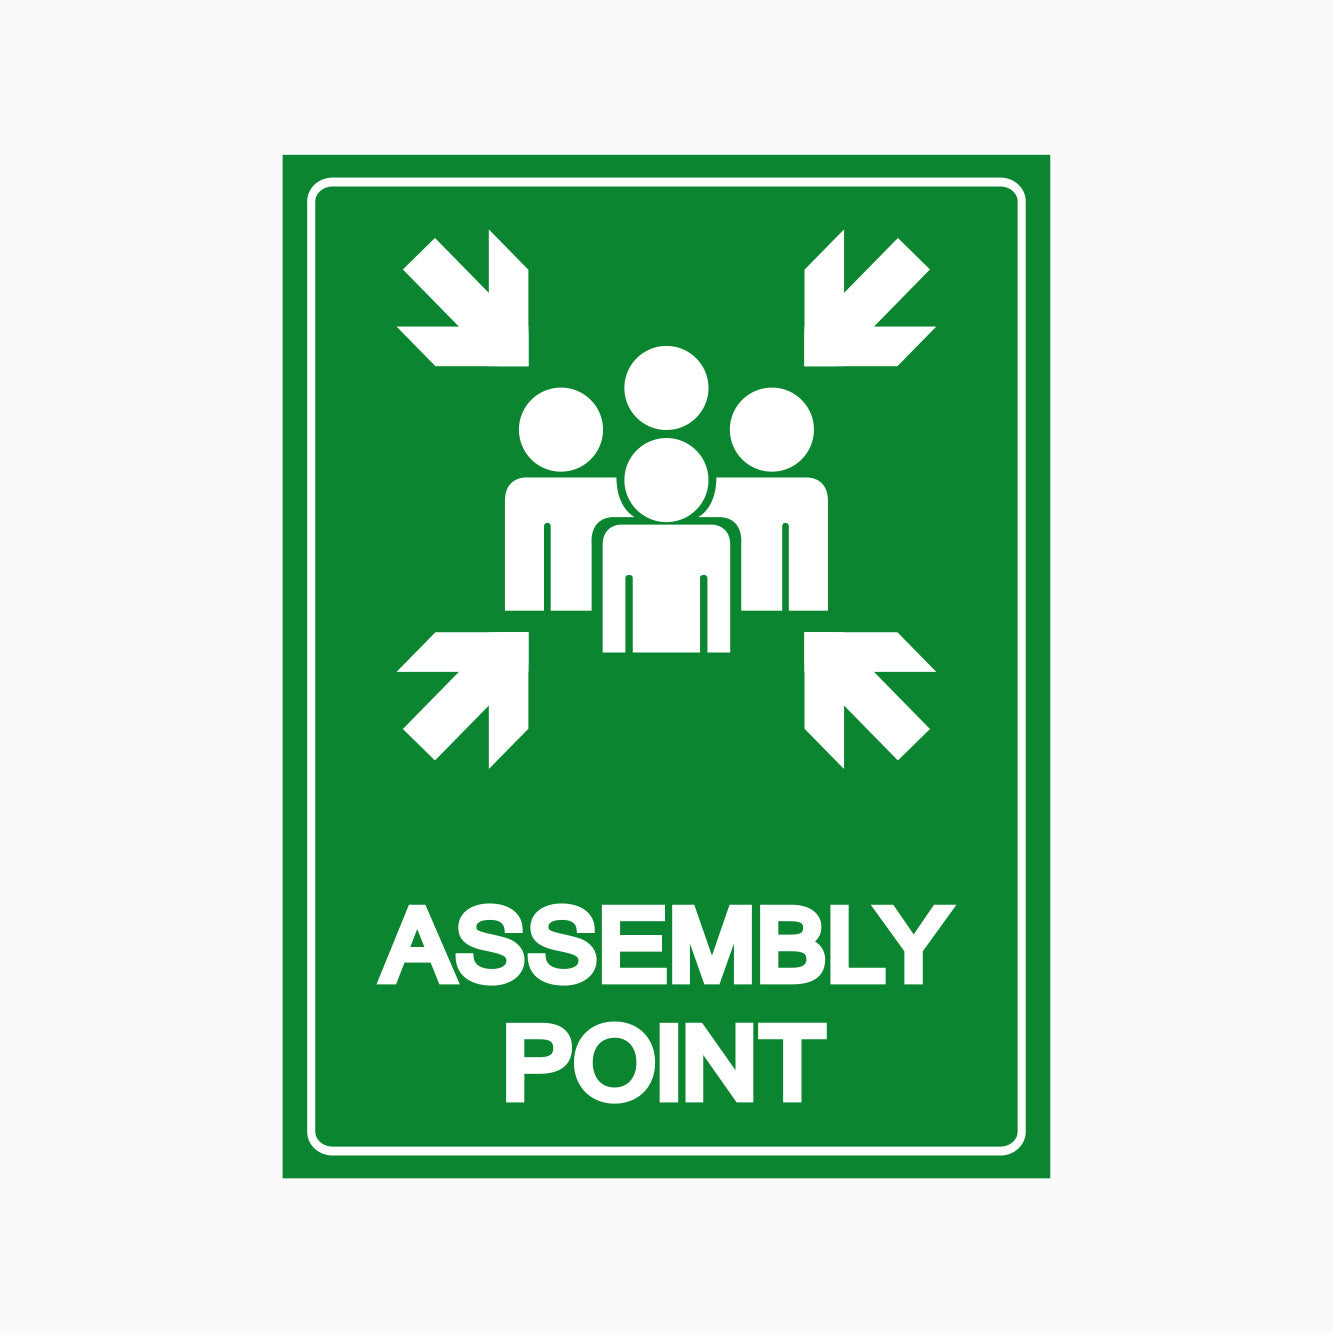 ASSEMBLY POINT SIGN - GET SIGNS 